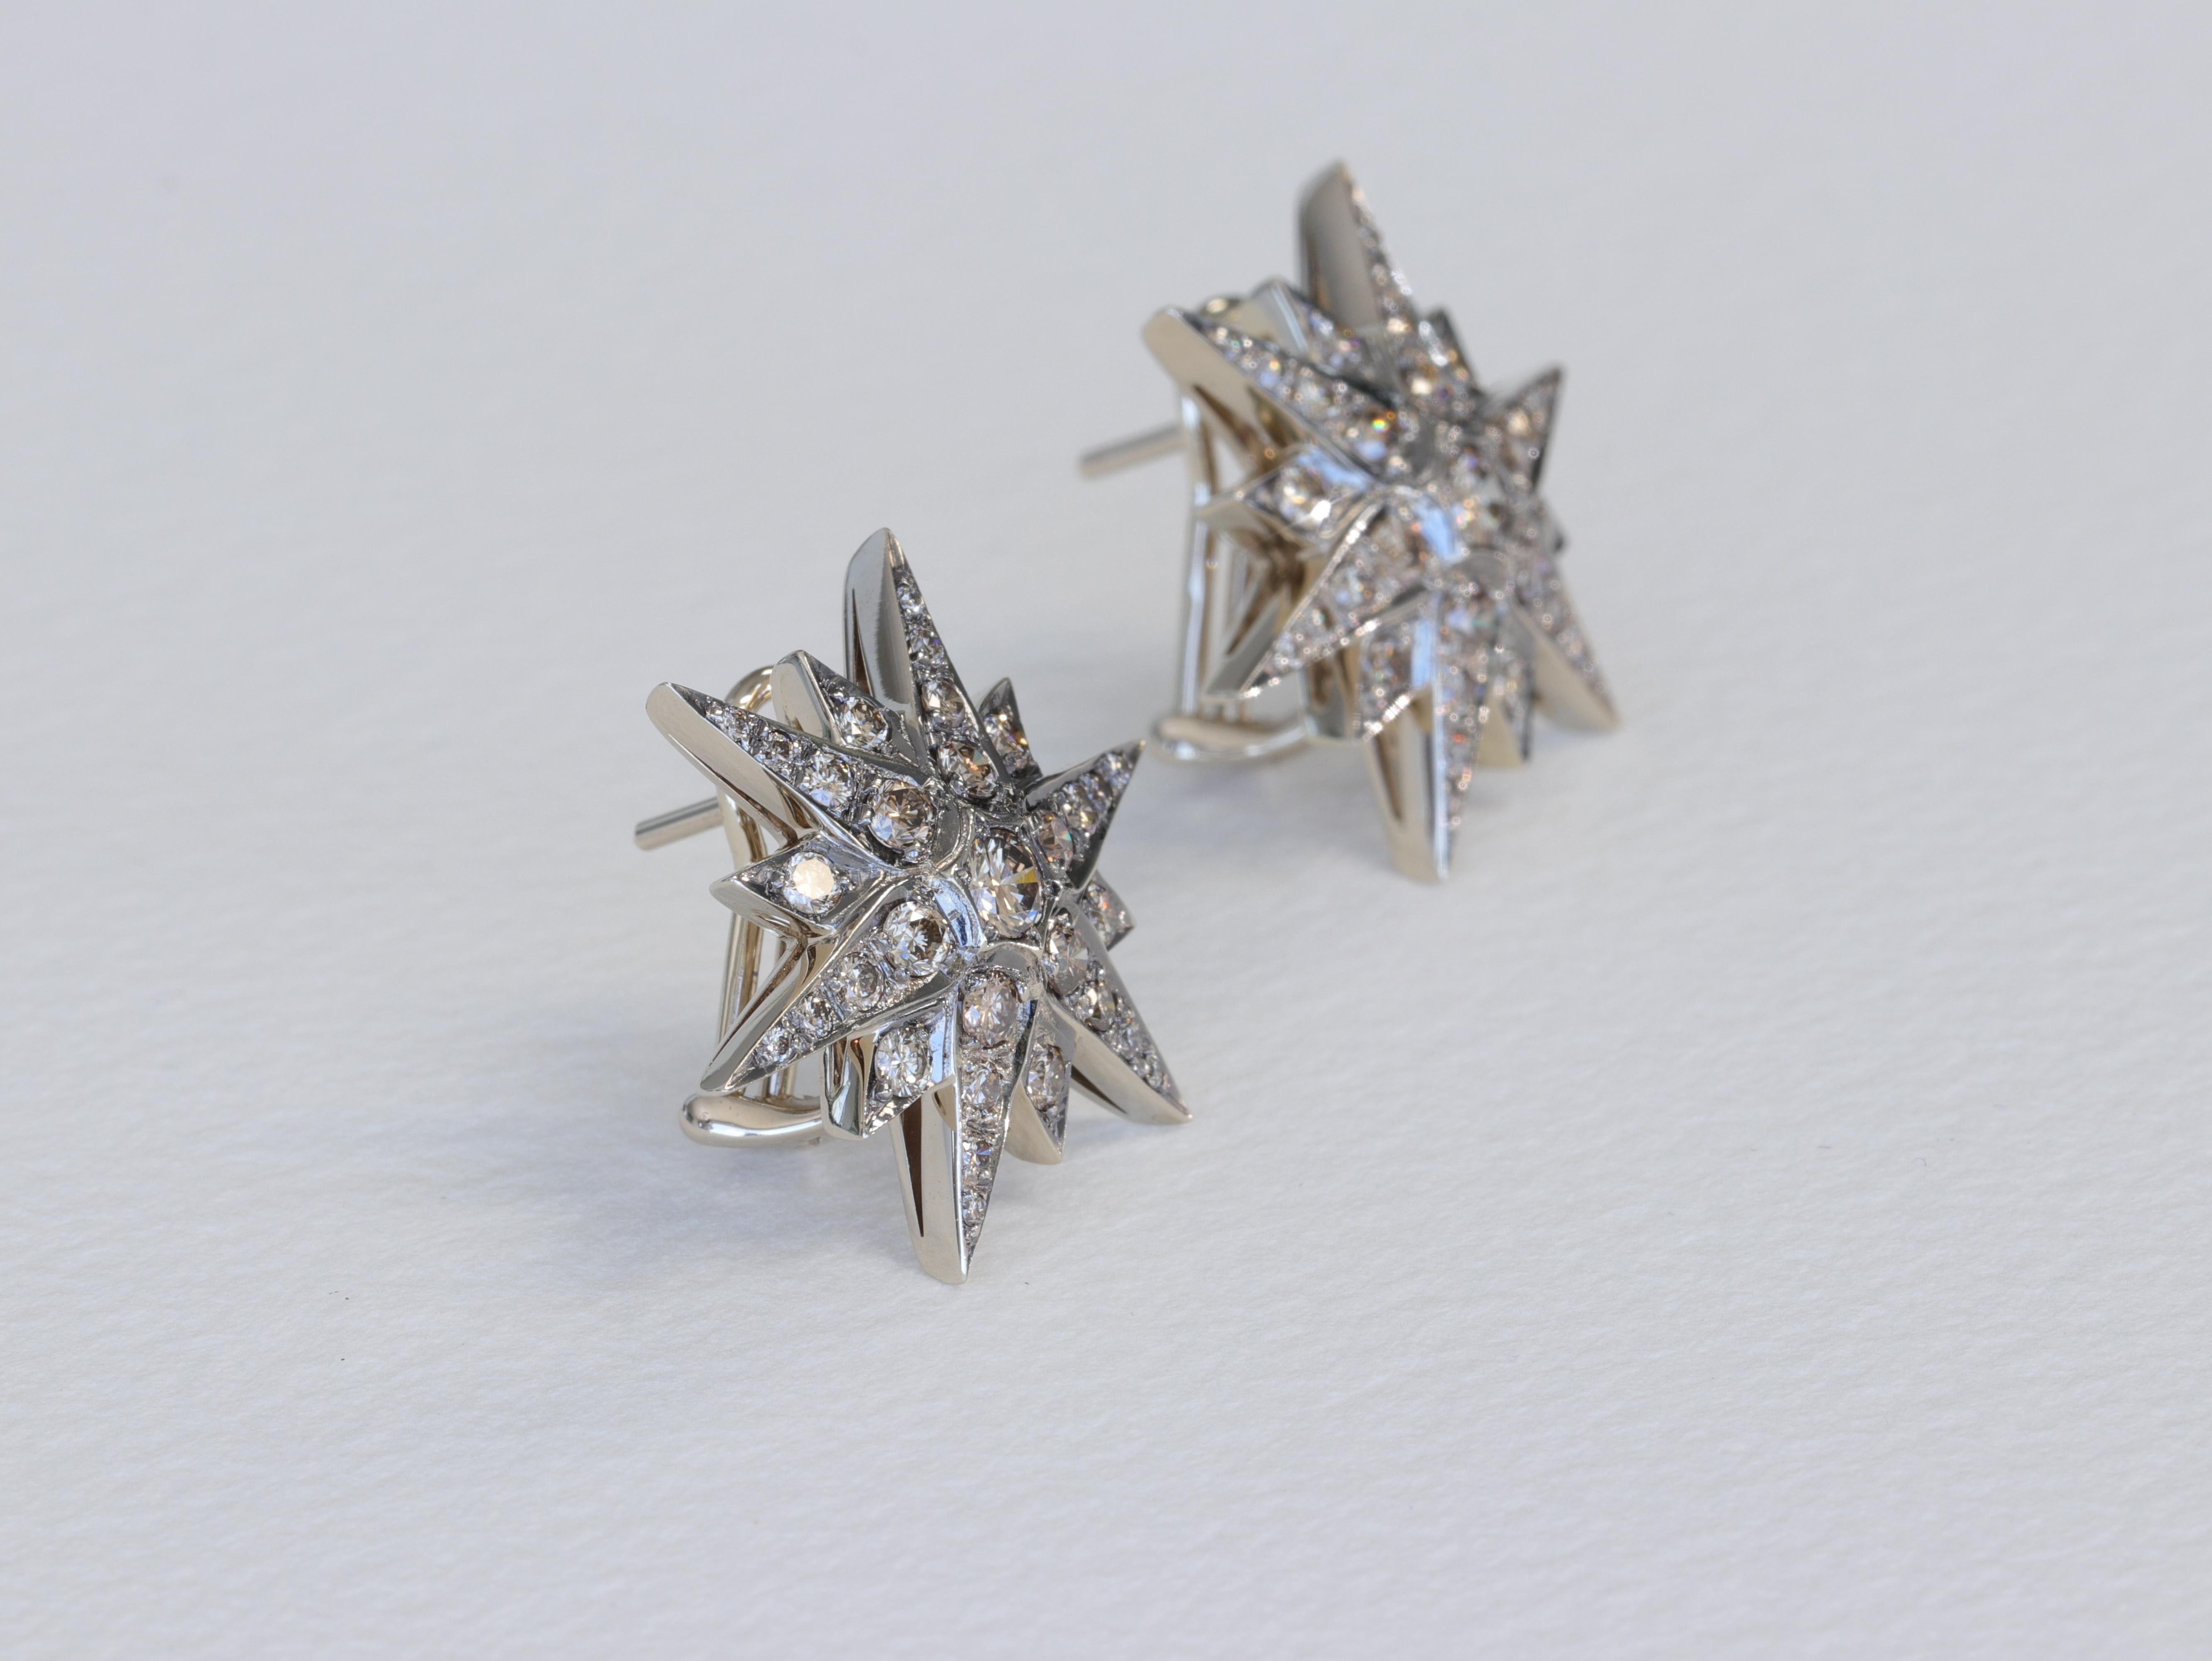 These H Stern earrings of the Genesis collection feature cognac colored round brilliant cut diamonds set in a star or sun ray pattern in 18 karat 